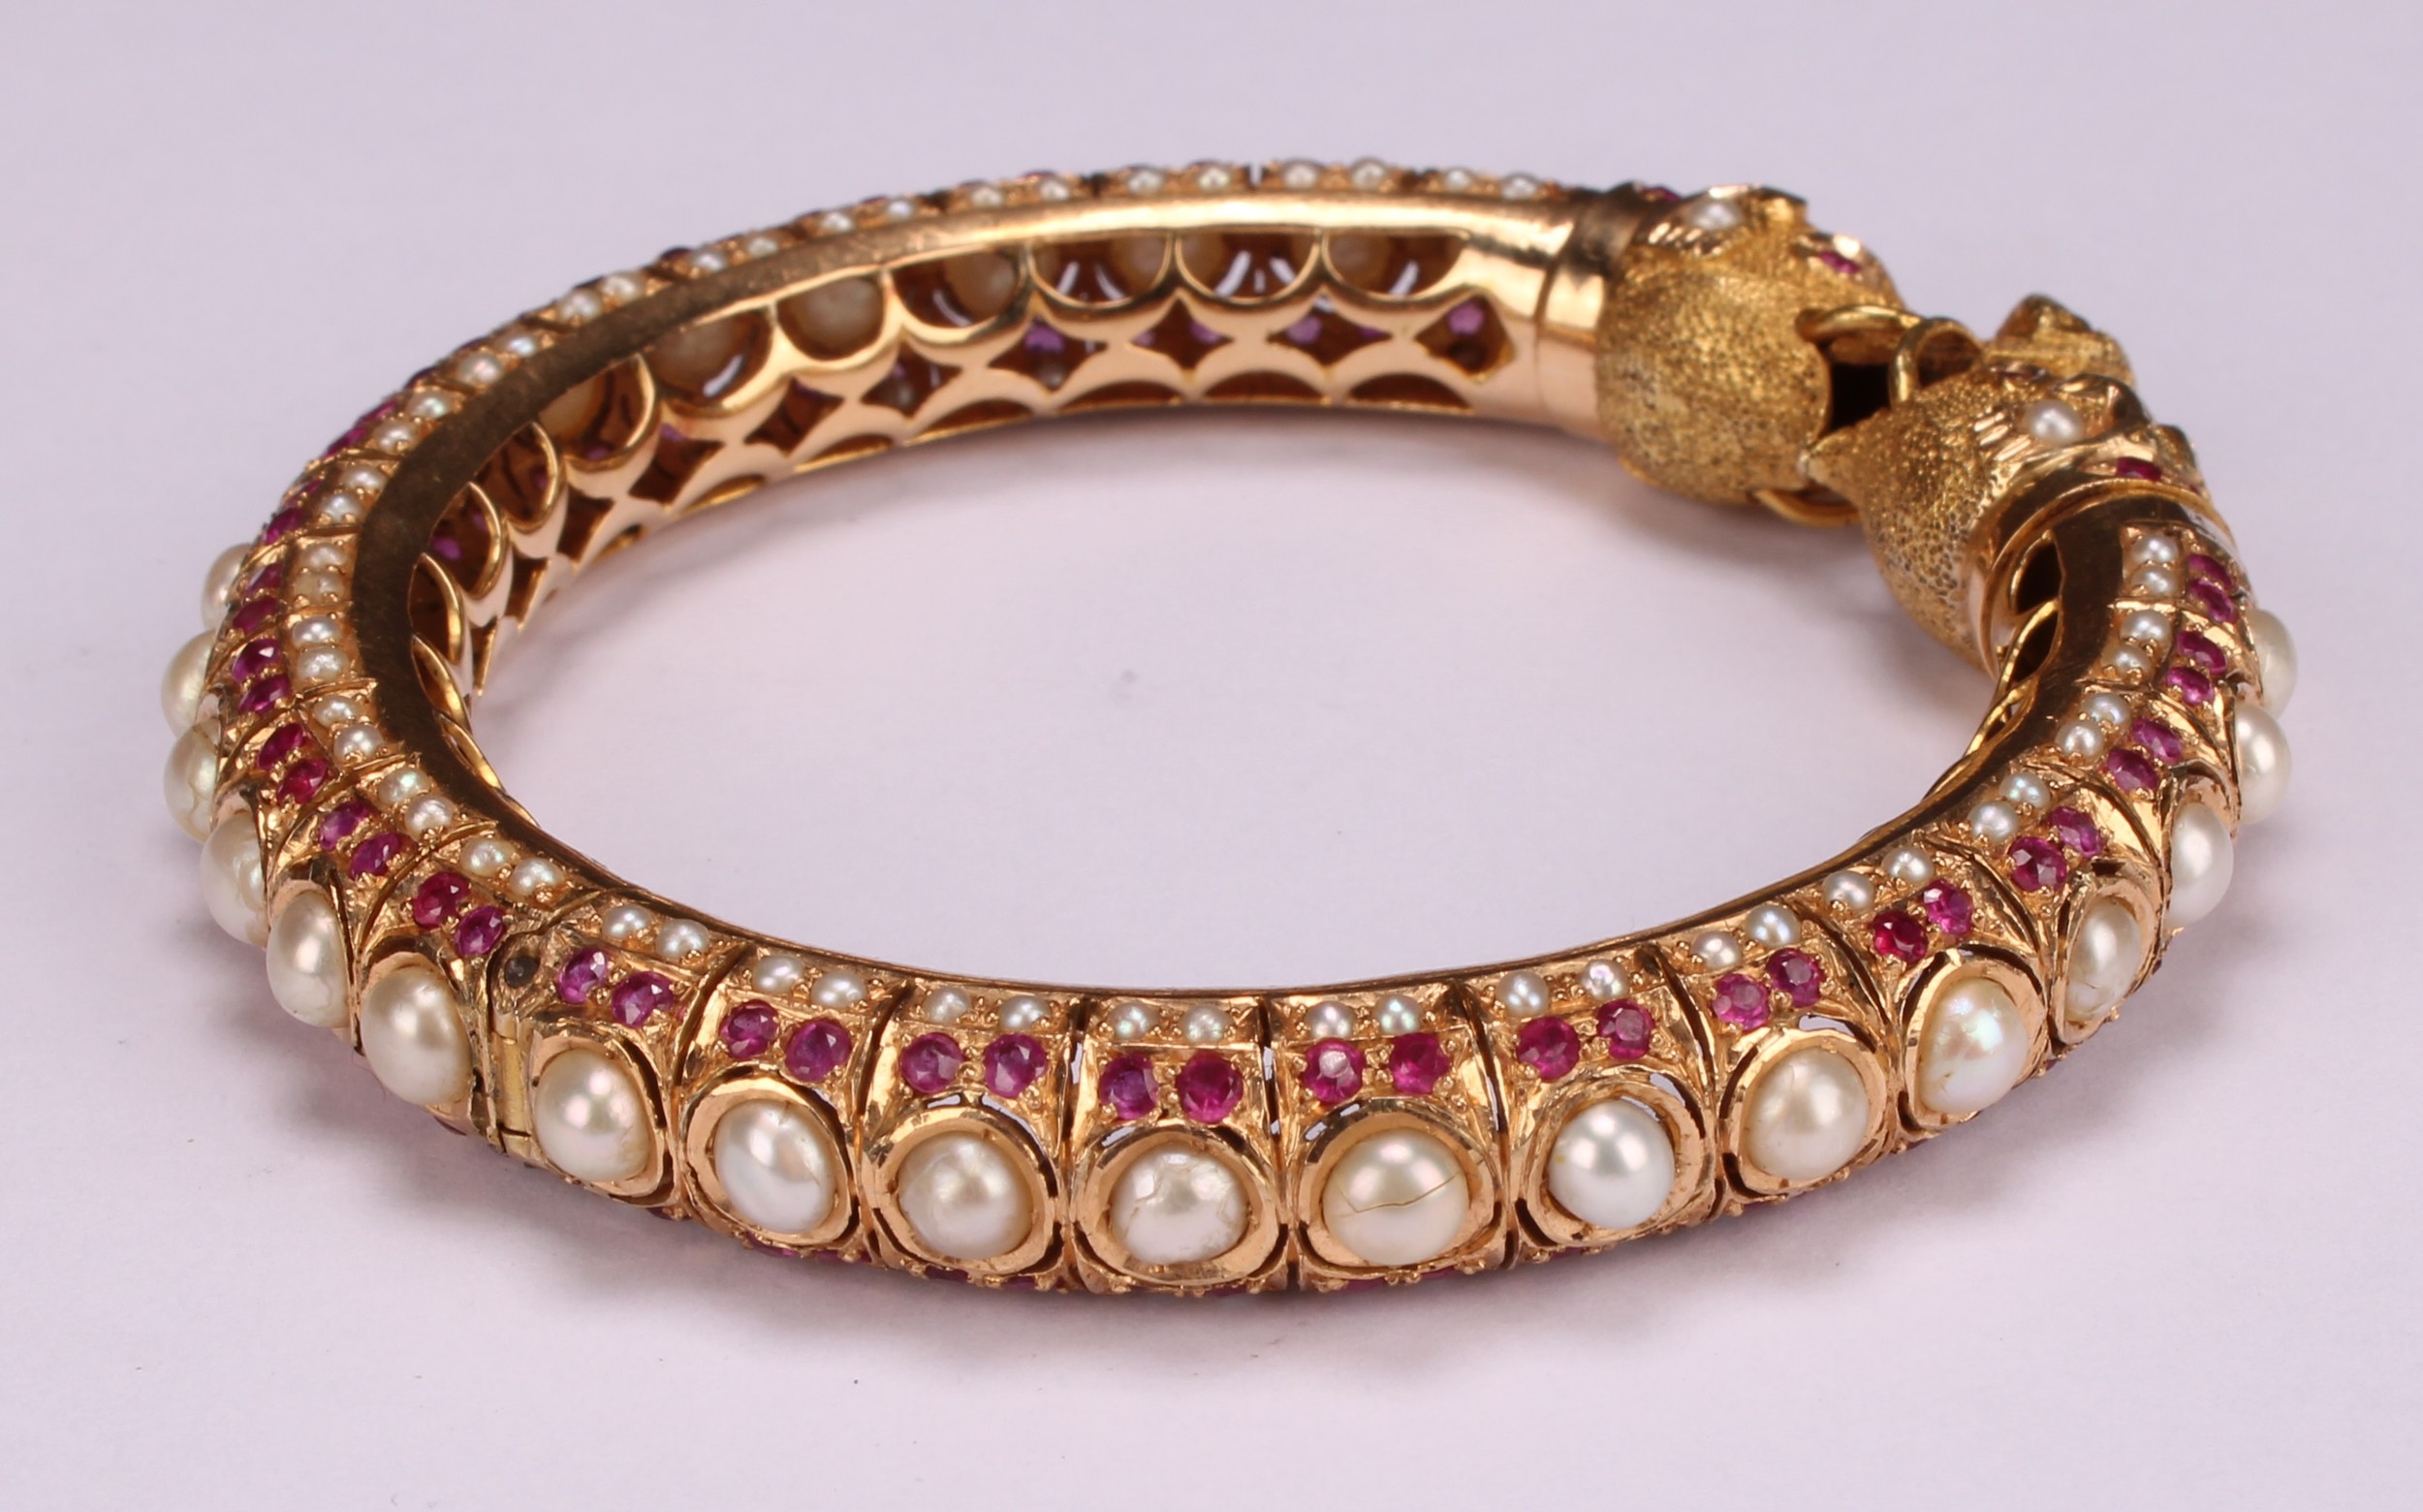 A pair of high carat gold coloured metal Indian wedding bangles, the whole inlaid with pearls - Image 8 of 11